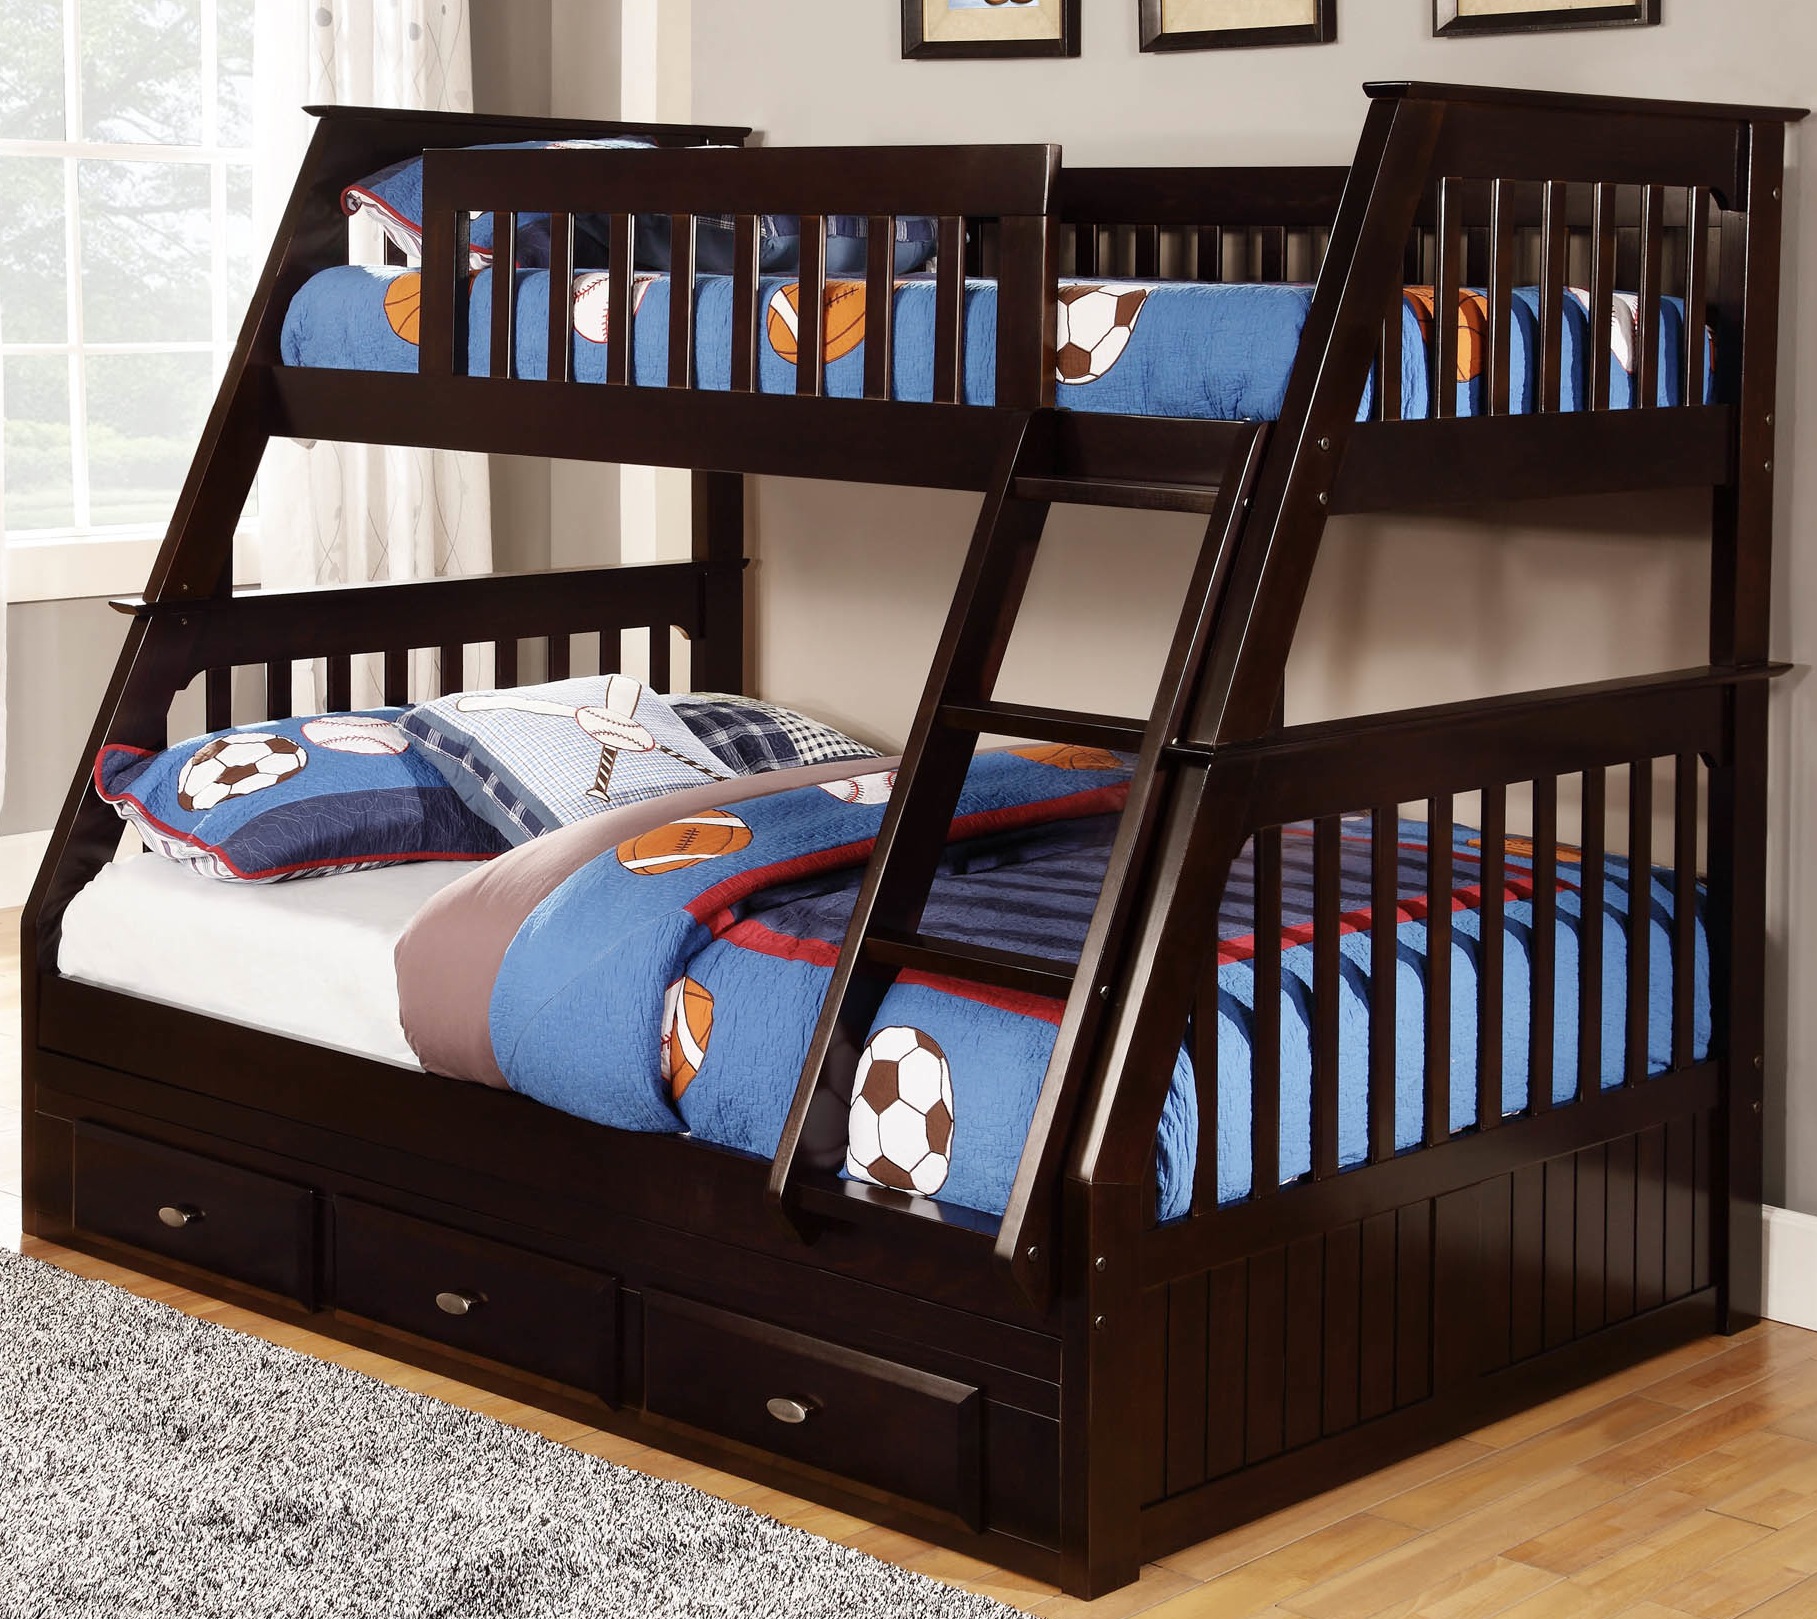 Espresso Mission Bunk Bed Kfs S, Best Twin Over Twin Bunk Beds